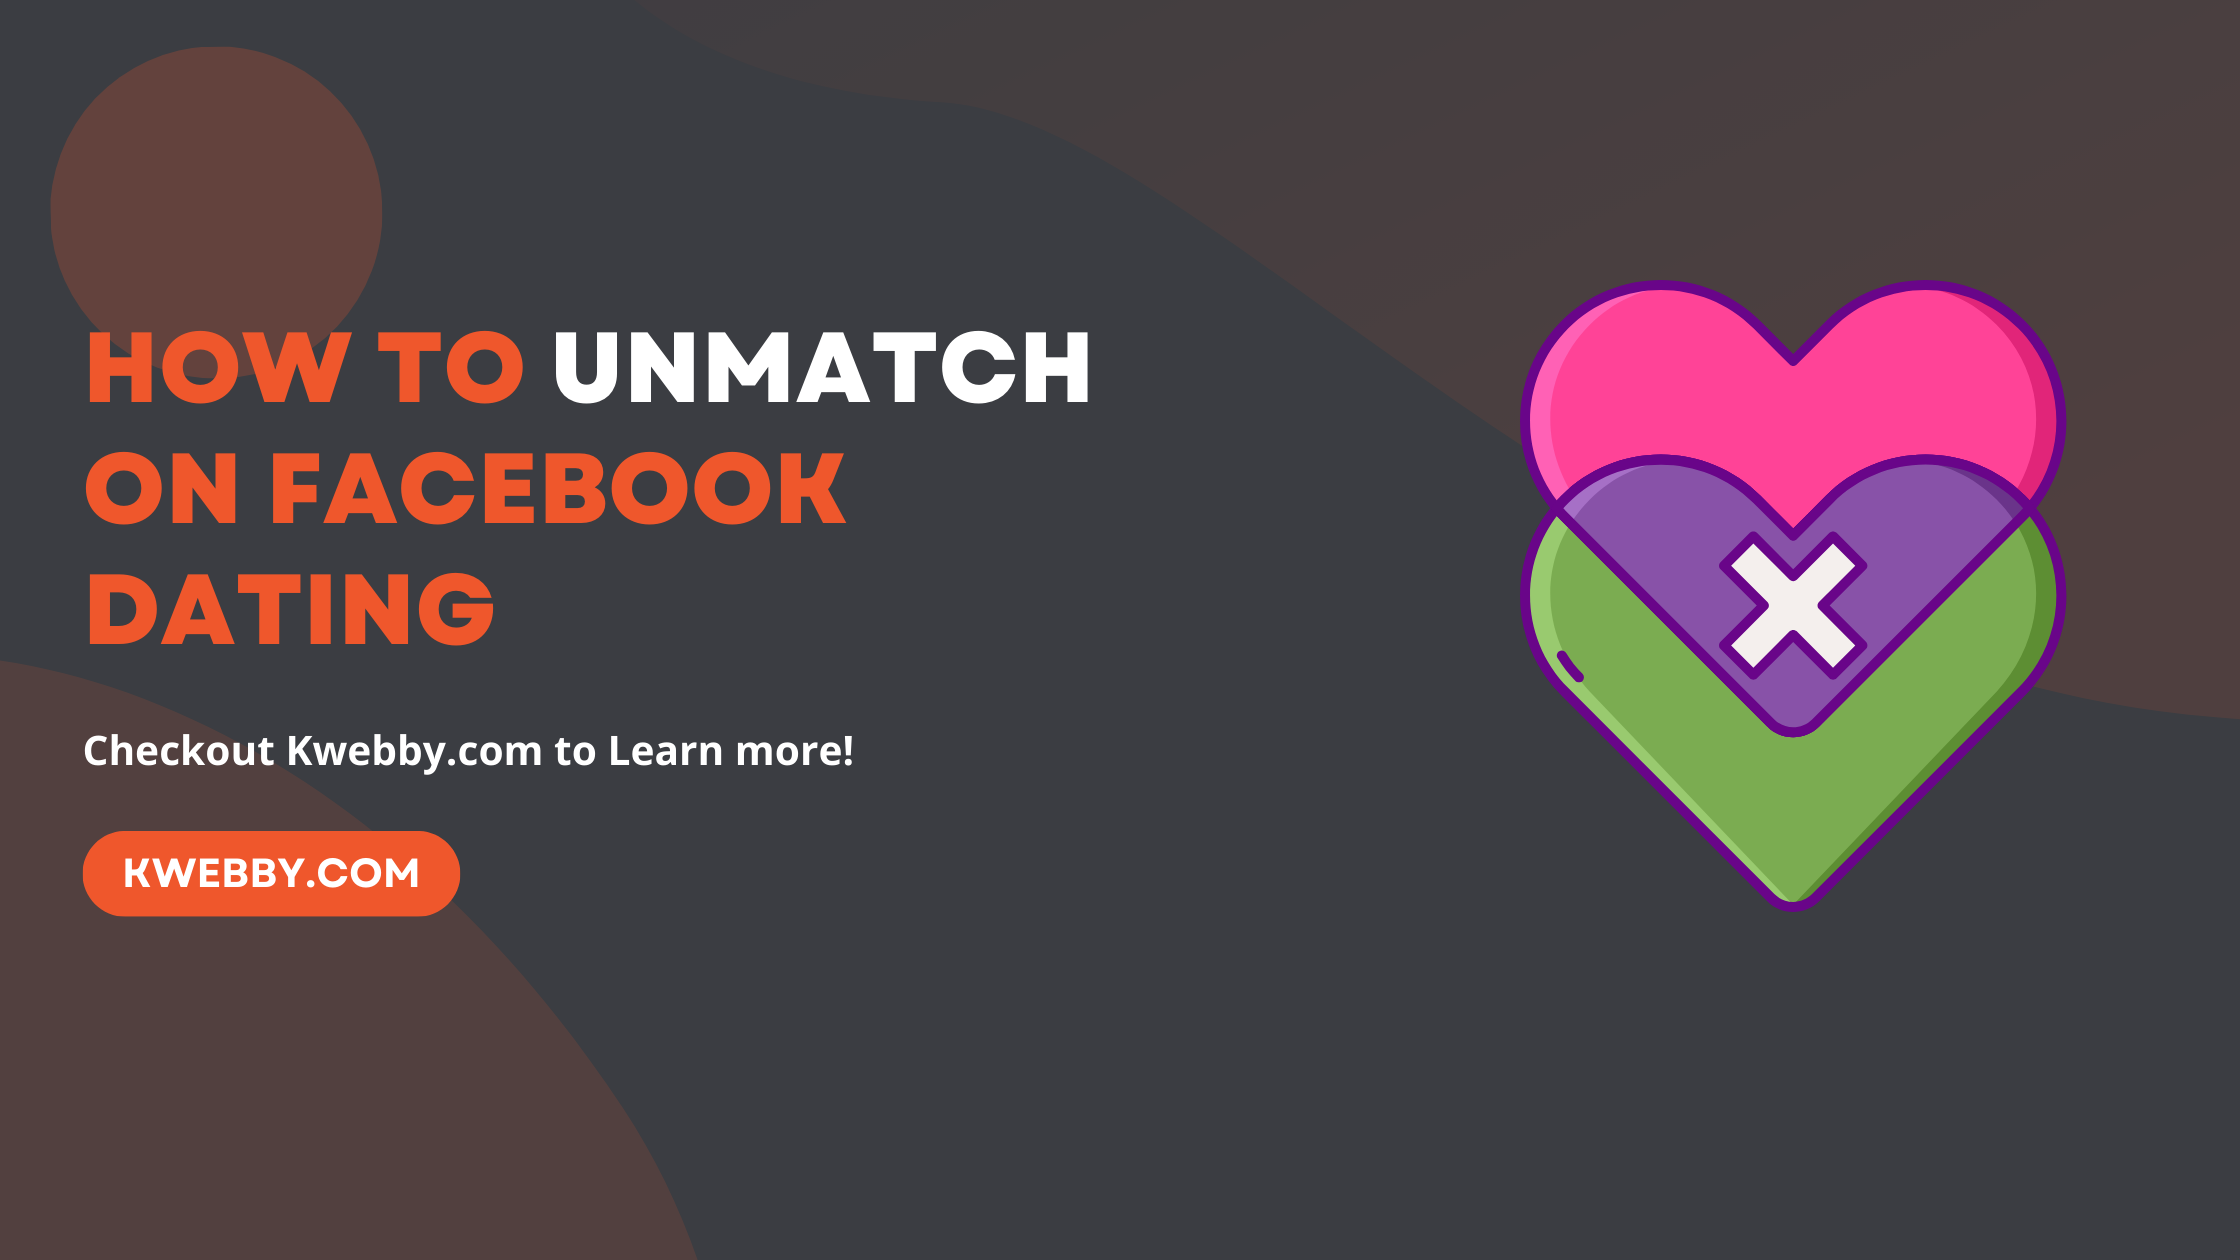 How to Unmatch on Facebook Dating (The Easy Way)